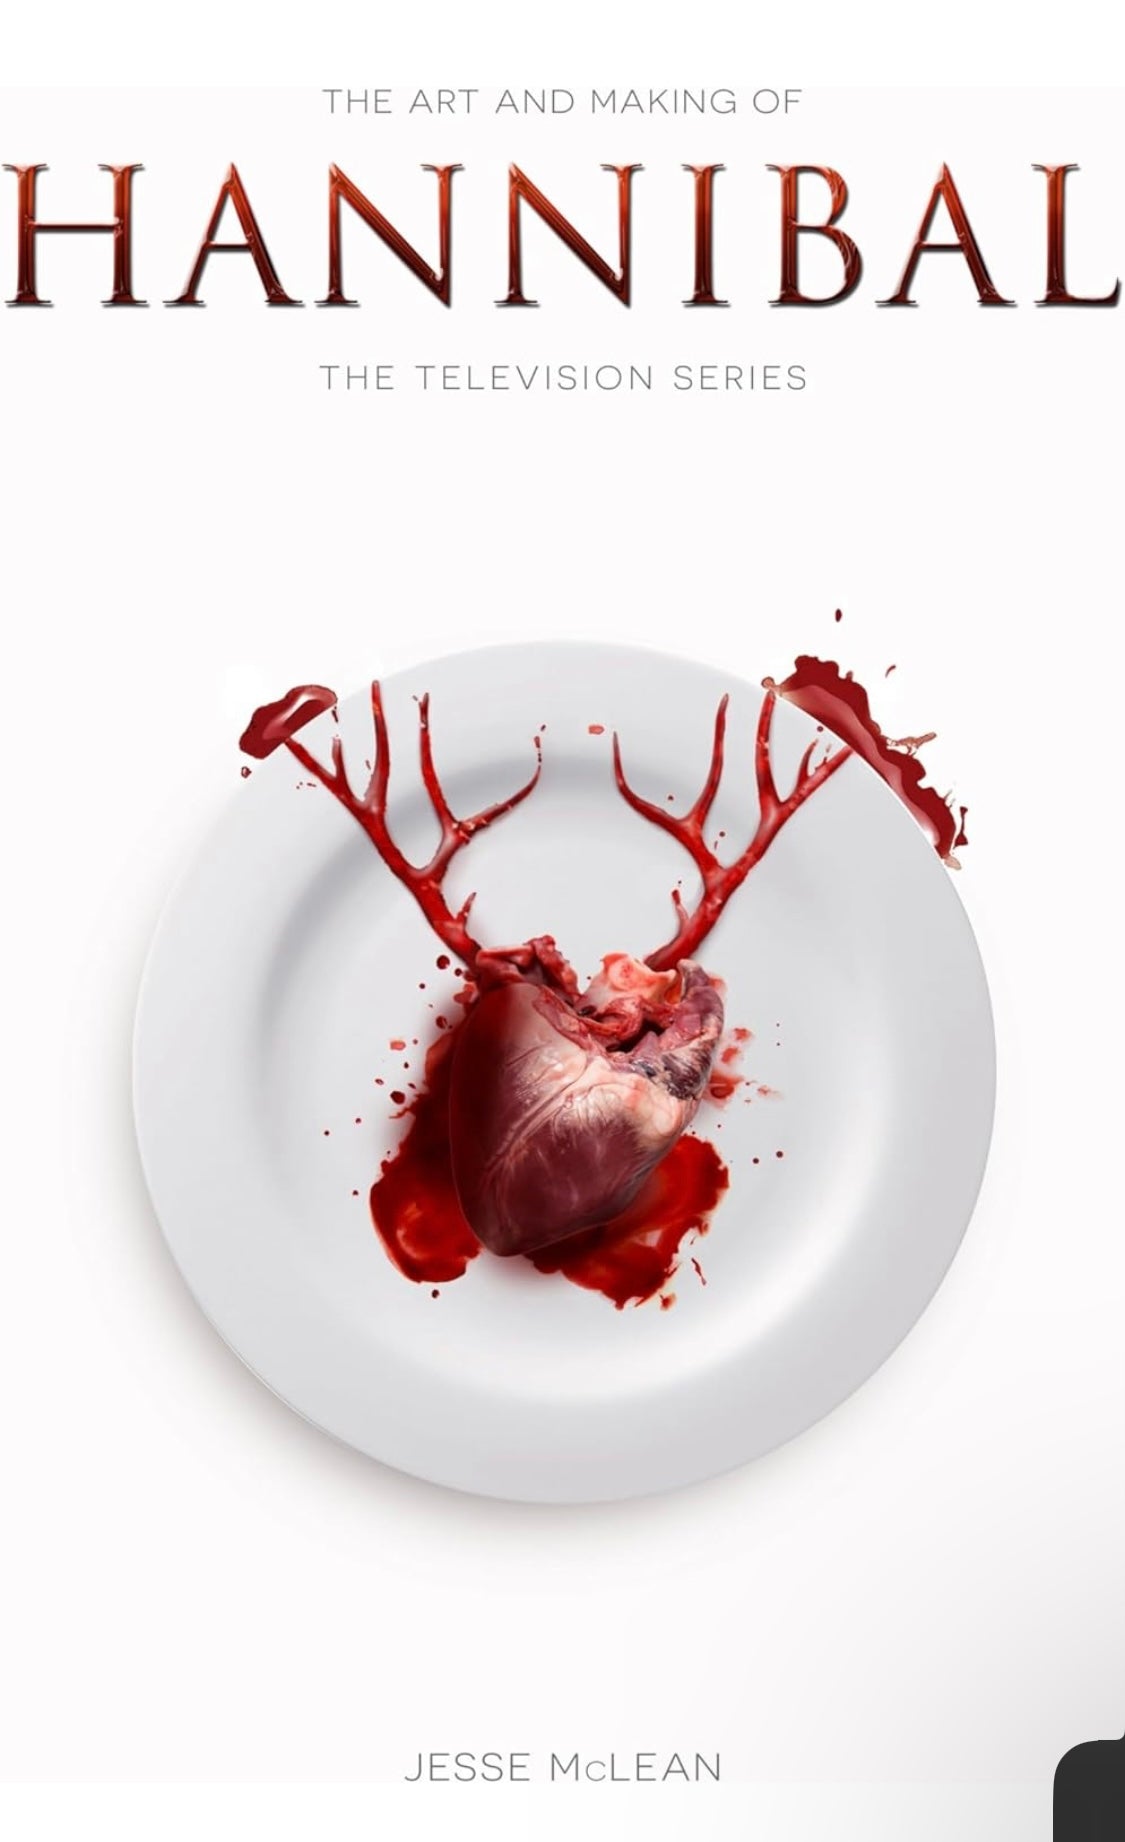 The Art and Making of Hannibal : The Television Series by Jesse McLean